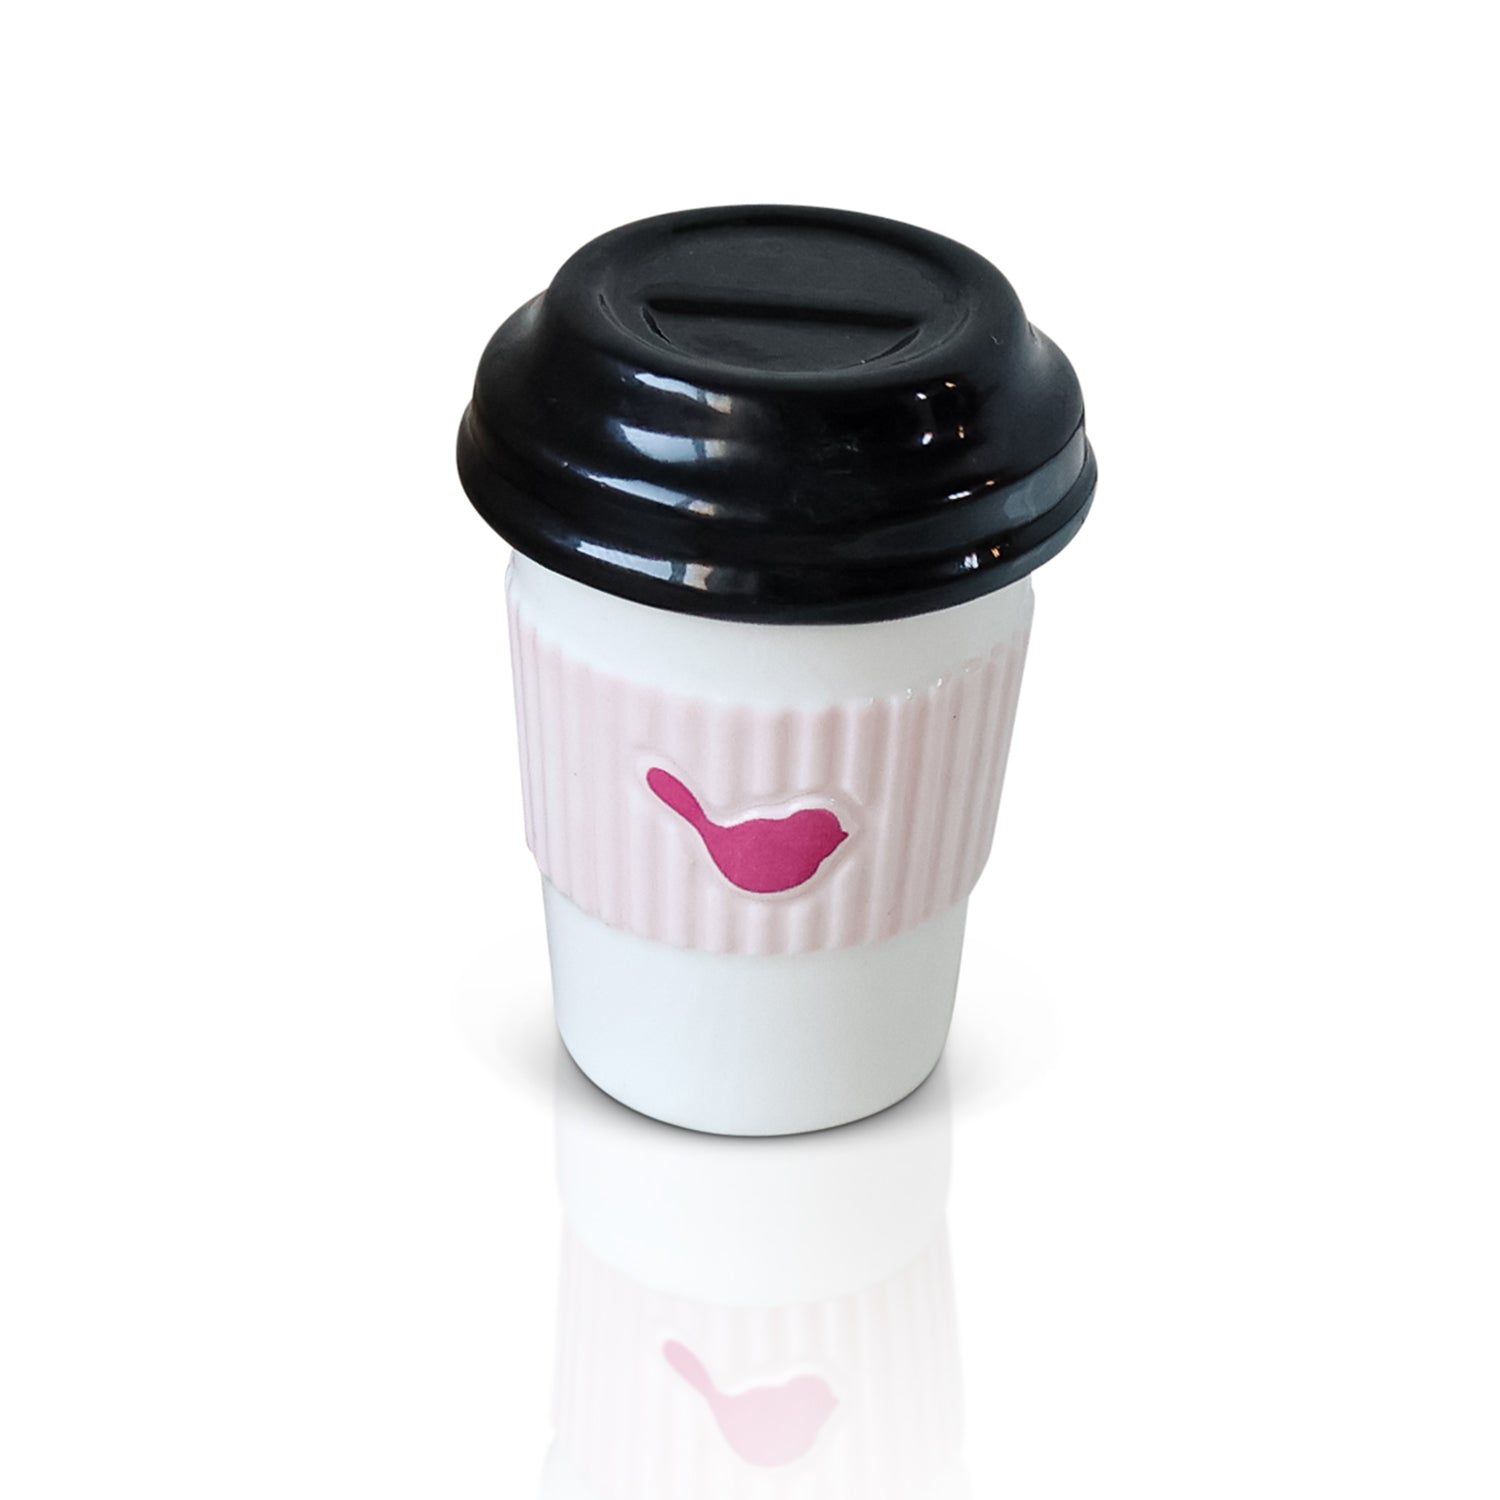 Cup of Ambition Coffee Cup Mini - Image 1 - Nora Fleming